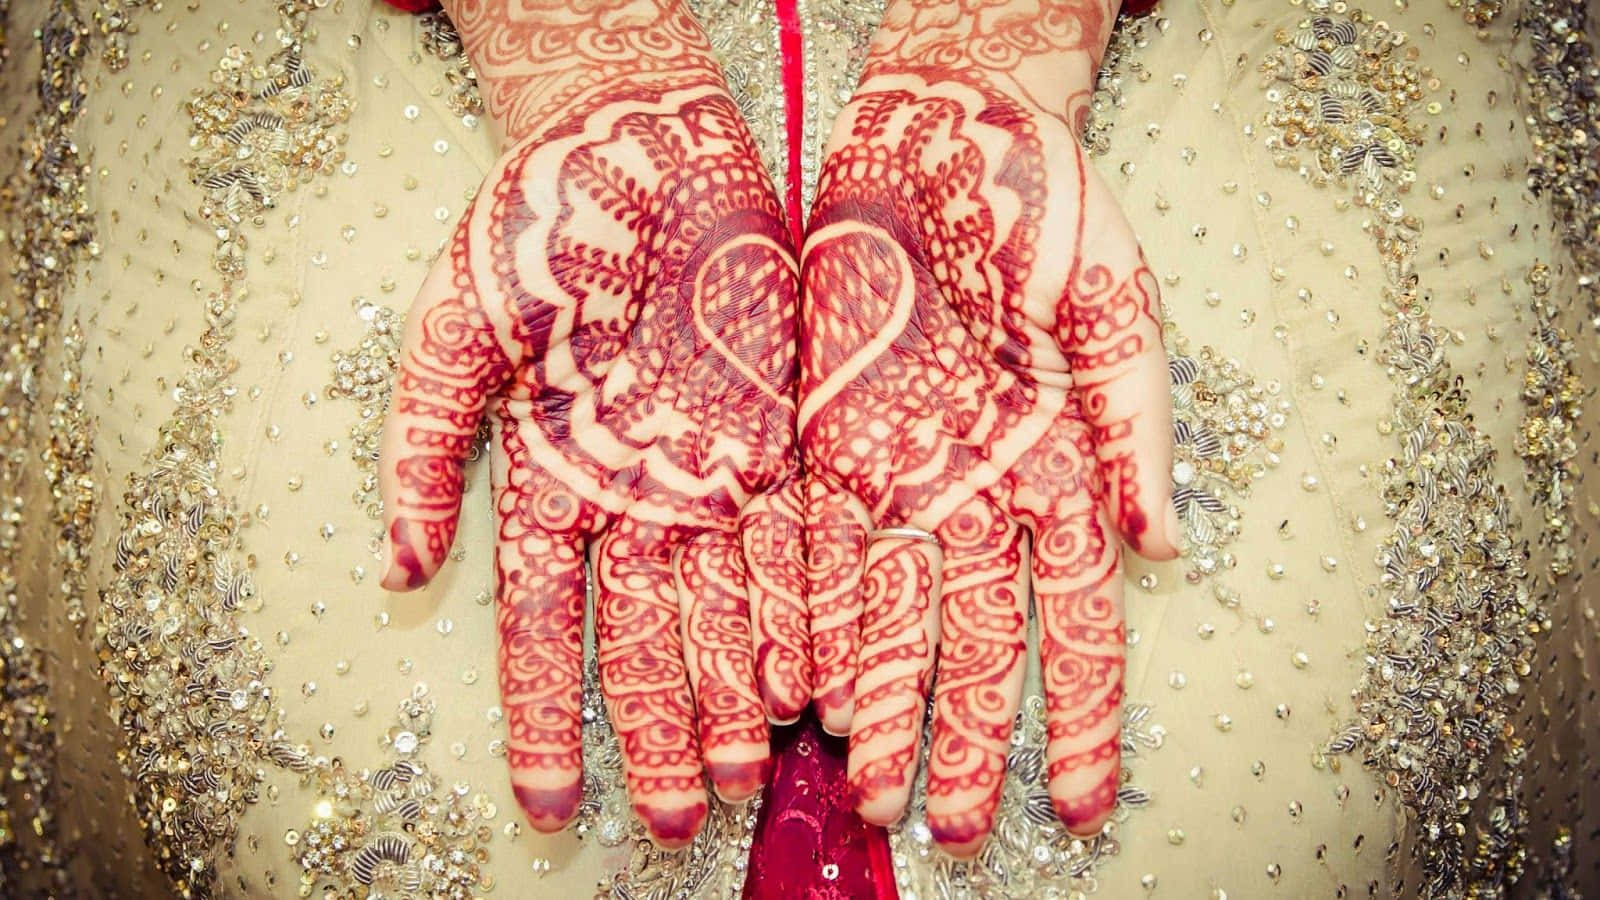 A Bride With Henna On Her Hands